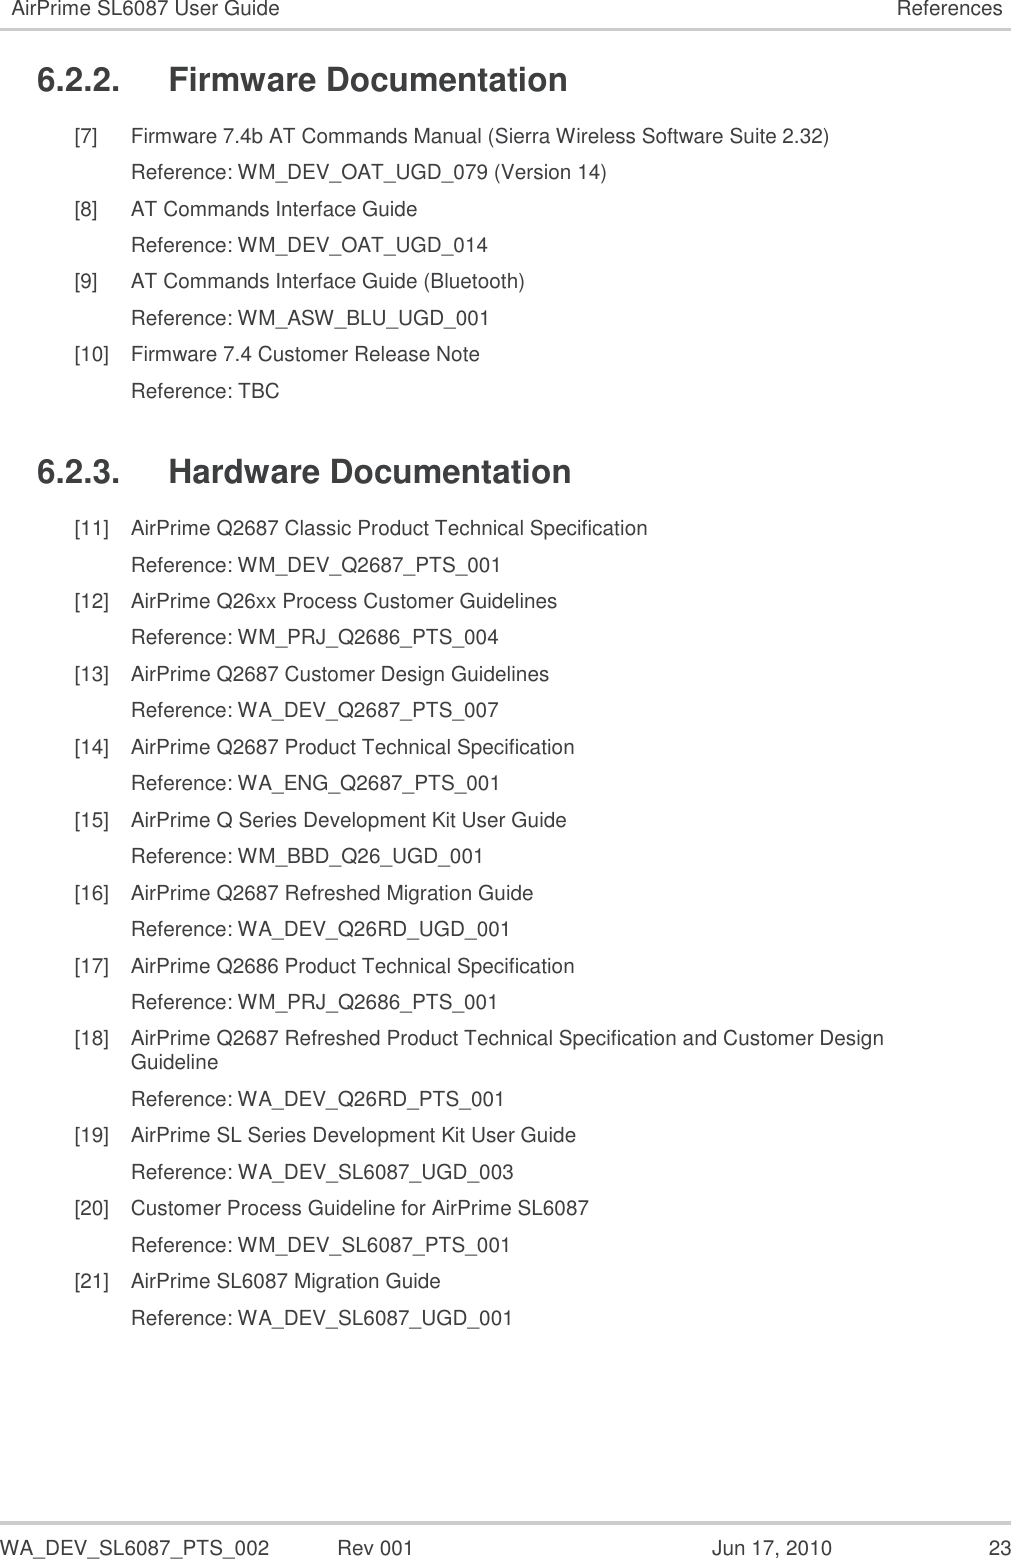   WA_DEV_SL6087_PTS_002  Rev 001  Jun 17, 2010  23 AirPrime SL6087 User Guide References 6.2.2.  Firmware Documentation [7] Firmware 7.4b AT Commands Manual (Sierra Wireless Software Suite 2.32) Reference: WM_DEV_OAT_UGD_079 (Version 14) [8] AT Commands Interface Guide Reference: WM_DEV_OAT_UGD_014 [9] AT Commands Interface Guide (Bluetooth) Reference: WM_ASW_BLU_UGD_001 [10] Firmware 7.4 Customer Release Note Reference: TBC 6.2.3.  Hardware Documentation [11] AirPrime Q2687 Classic Product Technical Specification Reference: WM_DEV_Q2687_PTS_001 [12] AirPrime Q26xx Process Customer Guidelines Reference: WM_PRJ_Q2686_PTS_004 [13] AirPrime Q2687 Customer Design Guidelines Reference: WA_DEV_Q2687_PTS_007 [14] AirPrime Q2687 Product Technical Specification Reference: WA_ENG_Q2687_PTS_001 [15] AirPrime Q Series Development Kit User Guide Reference: WM_BBD_Q26_UGD_001 [16] AirPrime Q2687 Refreshed Migration Guide Reference: WA_DEV_Q26RD_UGD_001 [17] AirPrime Q2686 Product Technical Specification Reference: WM_PRJ_Q2686_PTS_001 [18] AirPrime Q2687 Refreshed Product Technical Specification and Customer Design Guideline Reference: WA_DEV_Q26RD_PTS_001 [19] AirPrime SL Series Development Kit User Guide Reference: WA_DEV_SL6087_UGD_003 [20] Customer Process Guideline for AirPrime SL6087 Reference: WM_DEV_SL6087_PTS_001 [21] AirPrime SL6087 Migration Guide Reference: WA_DEV_SL6087_UGD_001 